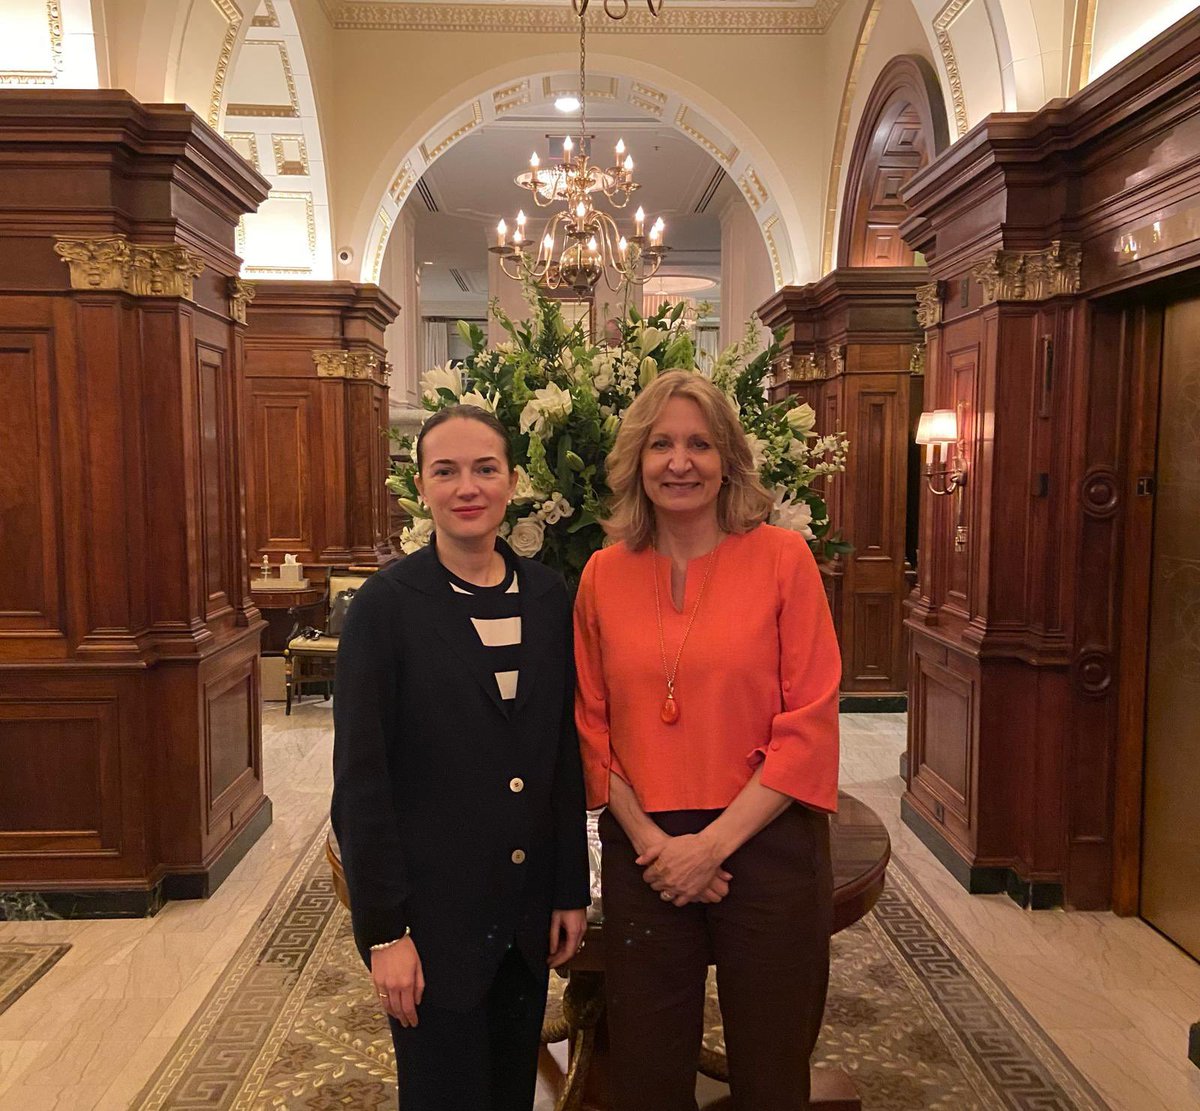 I had the pleasure of sharing a meal with the remarkable Oleksandra Matviichuk @avalaina. We remain inspired by the courage and resilience of advocates for human rights within Ukraine who are also promoting justice in connection with Russia’s war of aggression.